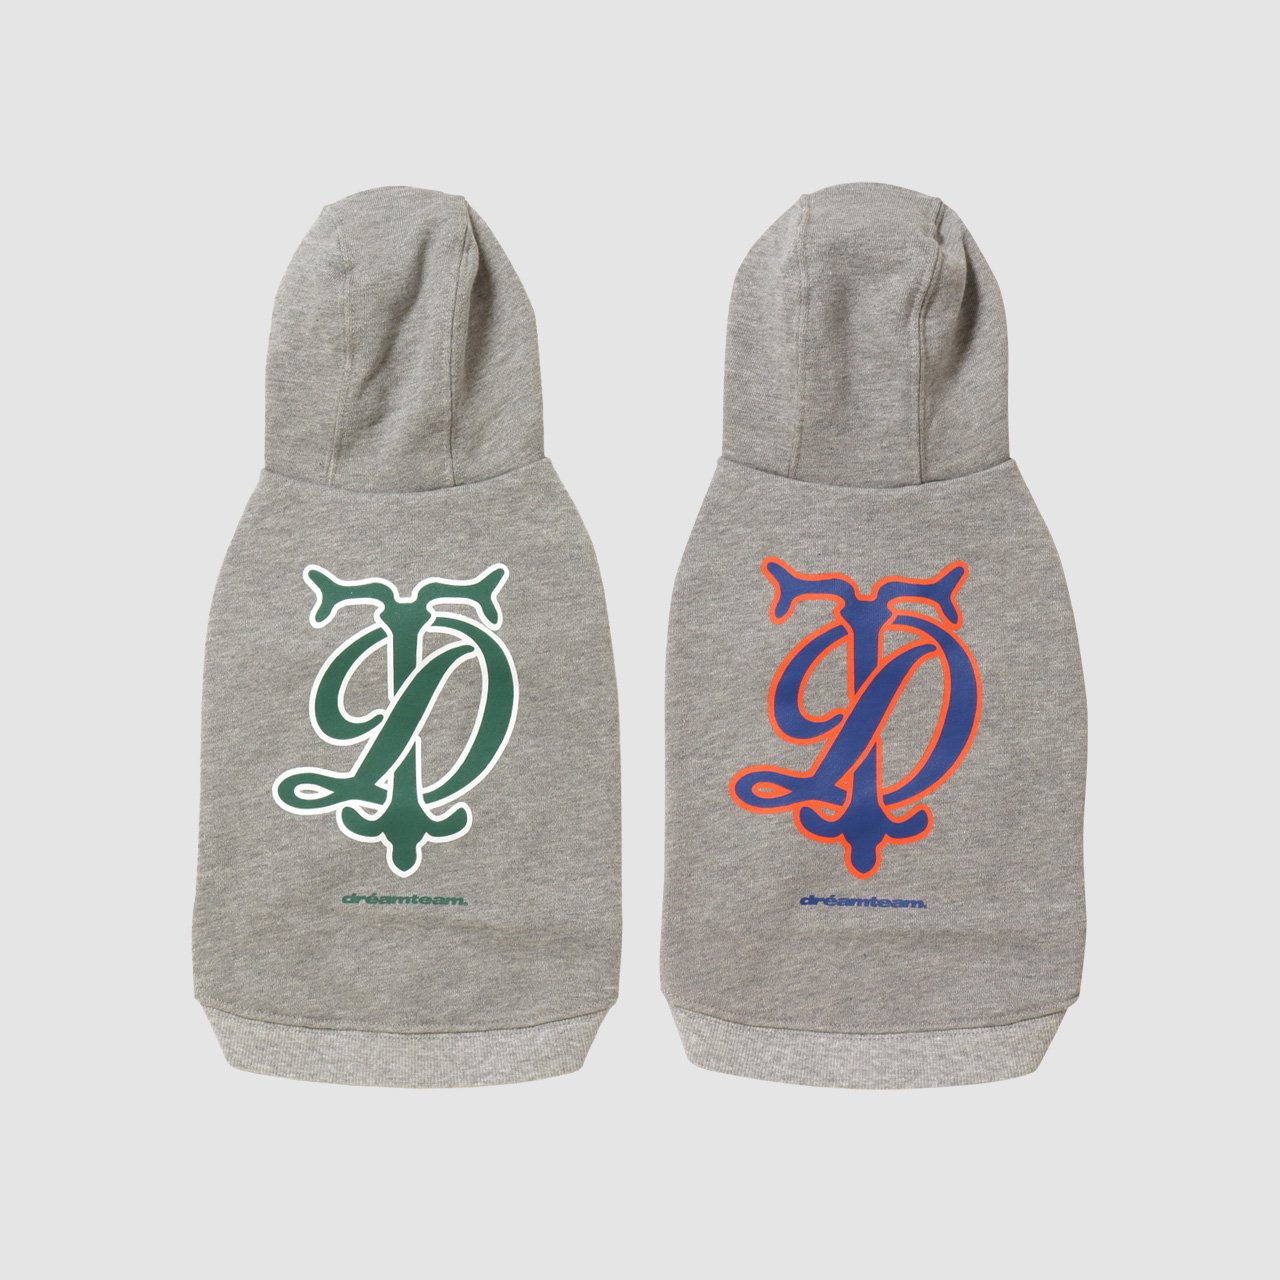 <img class='new_mark_img1' src='https://img.shop-pro.jp/img/new/icons21.gif' style='border:none;display:inline;margin:0px;padding:0px;width:auto;' />DT Vintage Logo Dog Hooded Pullover